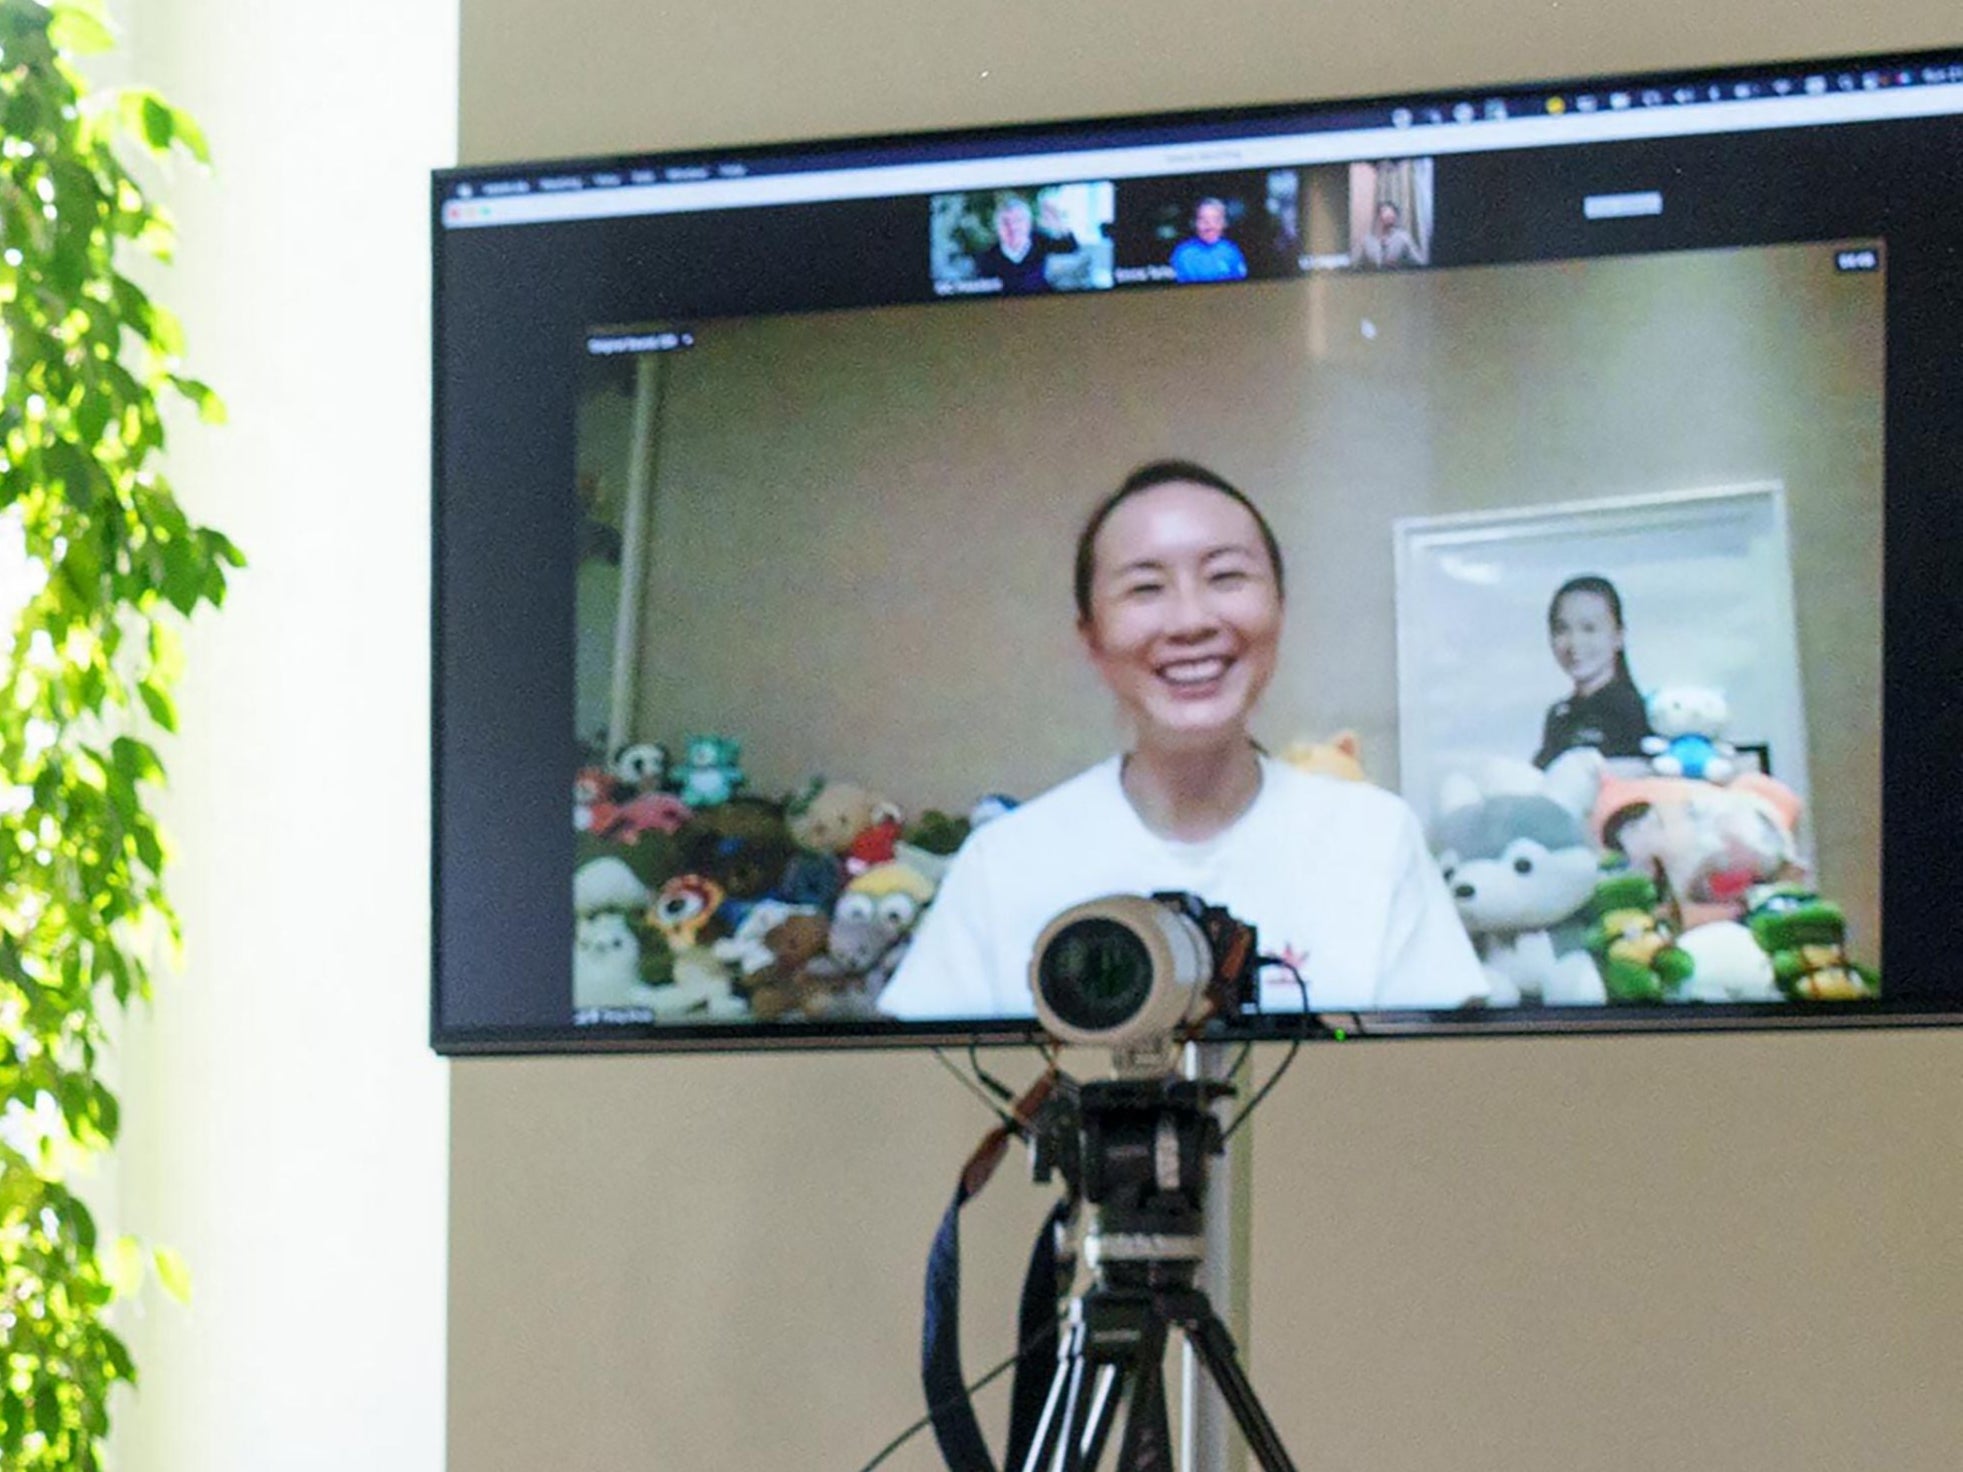 Peng Shuai appeared in a video call with the IOC